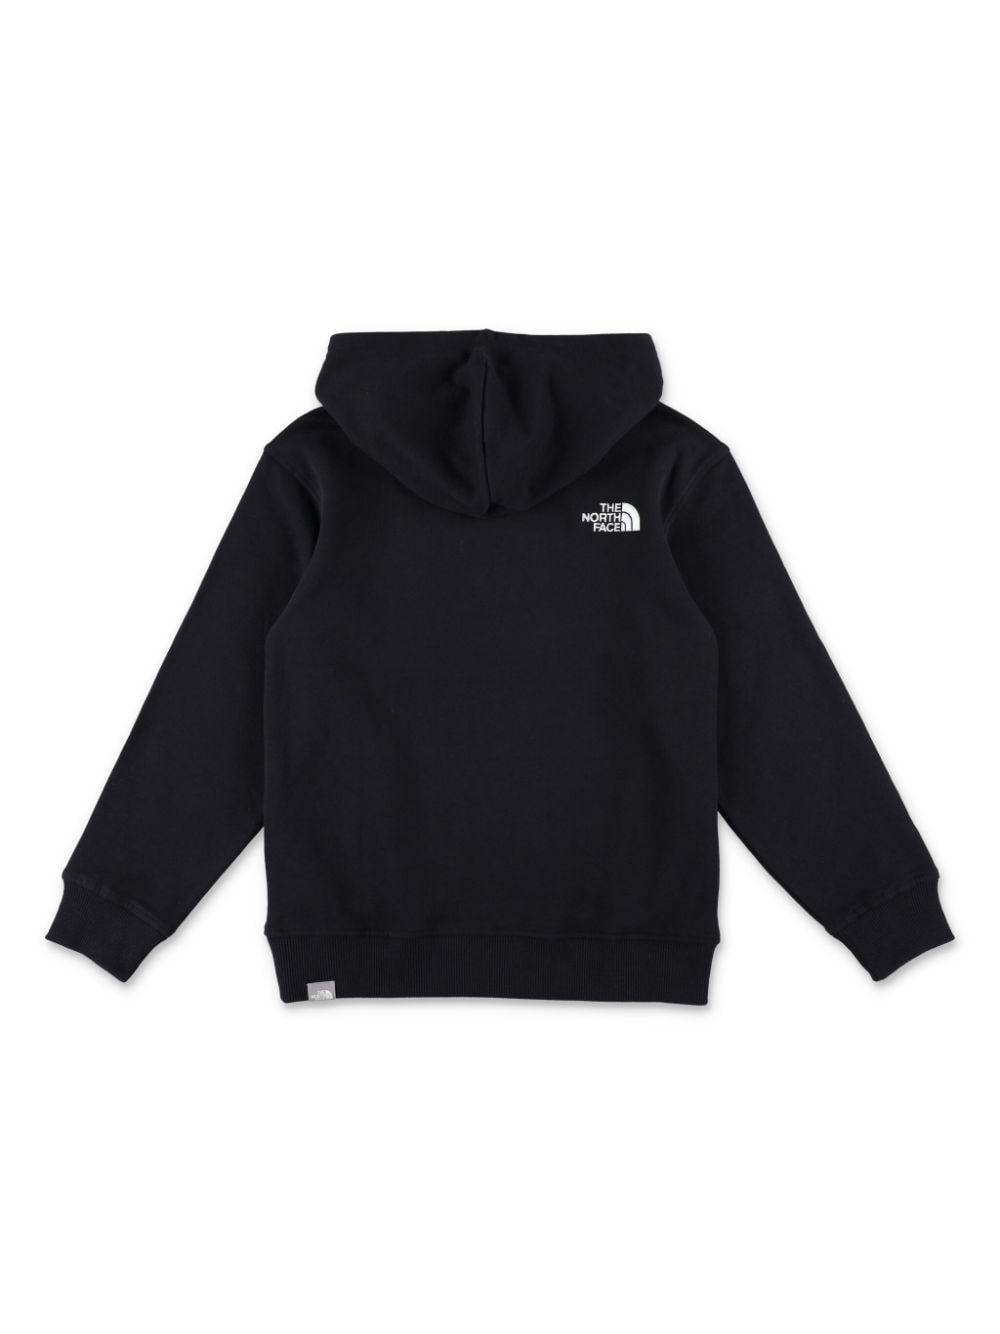 Image 2 of The North Face Kids logo-embroidered jersey hoodie